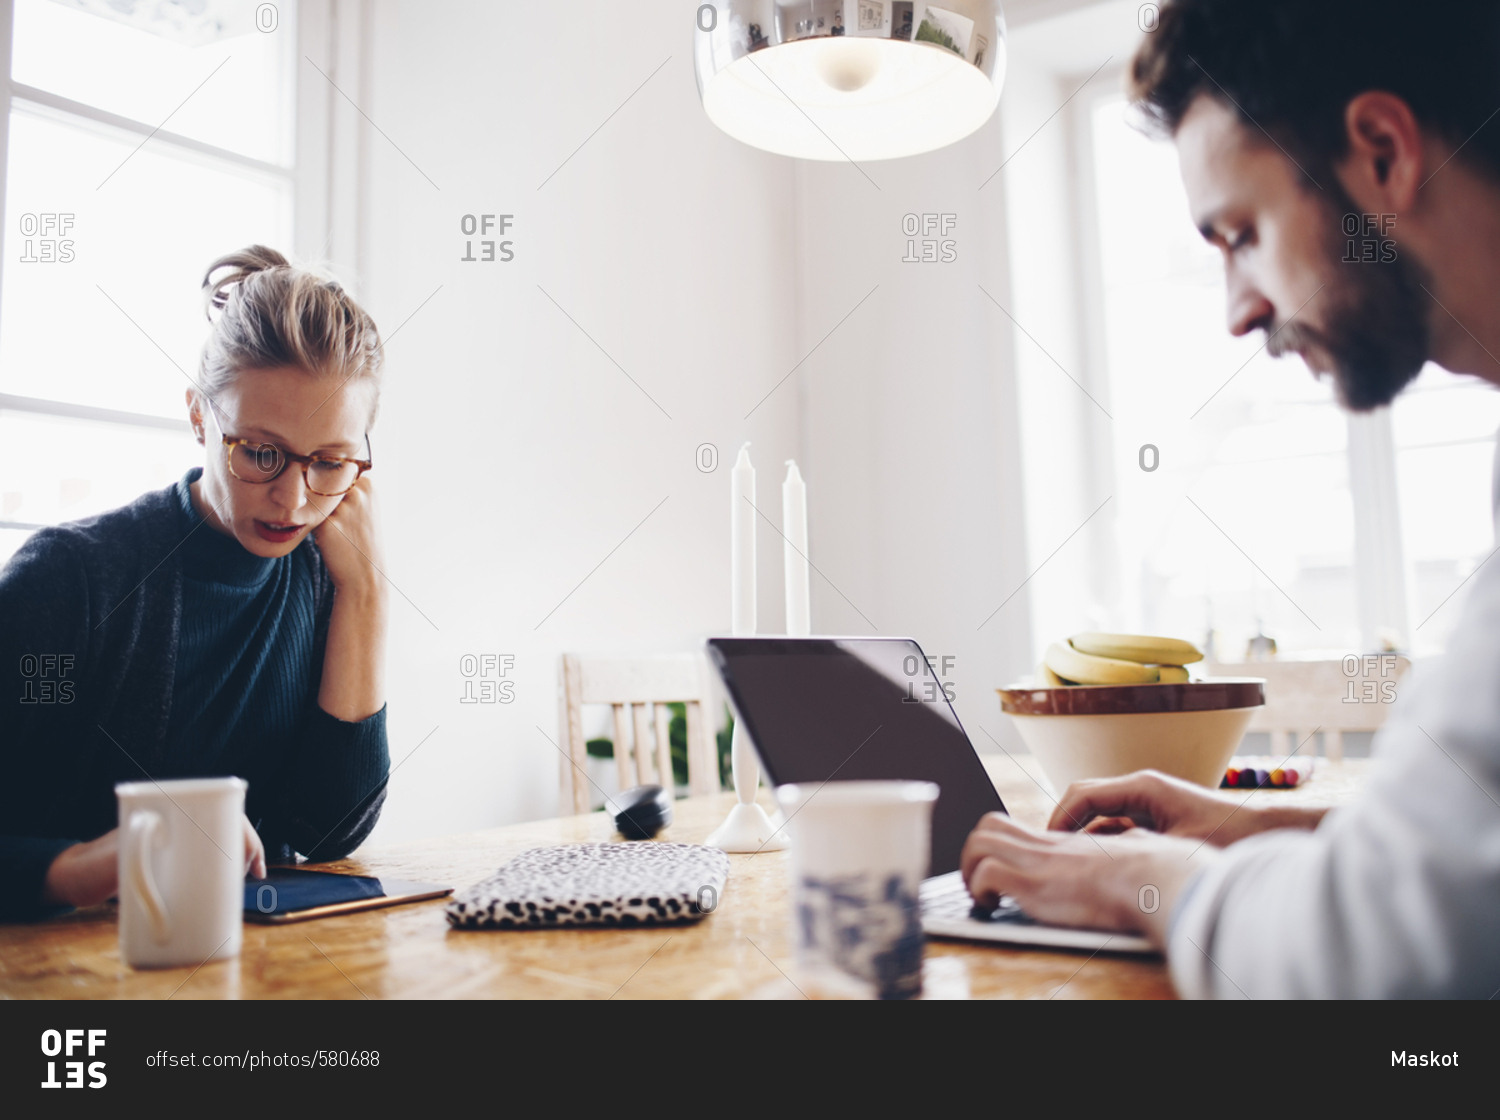 Couple using technologies at dining table while working from home